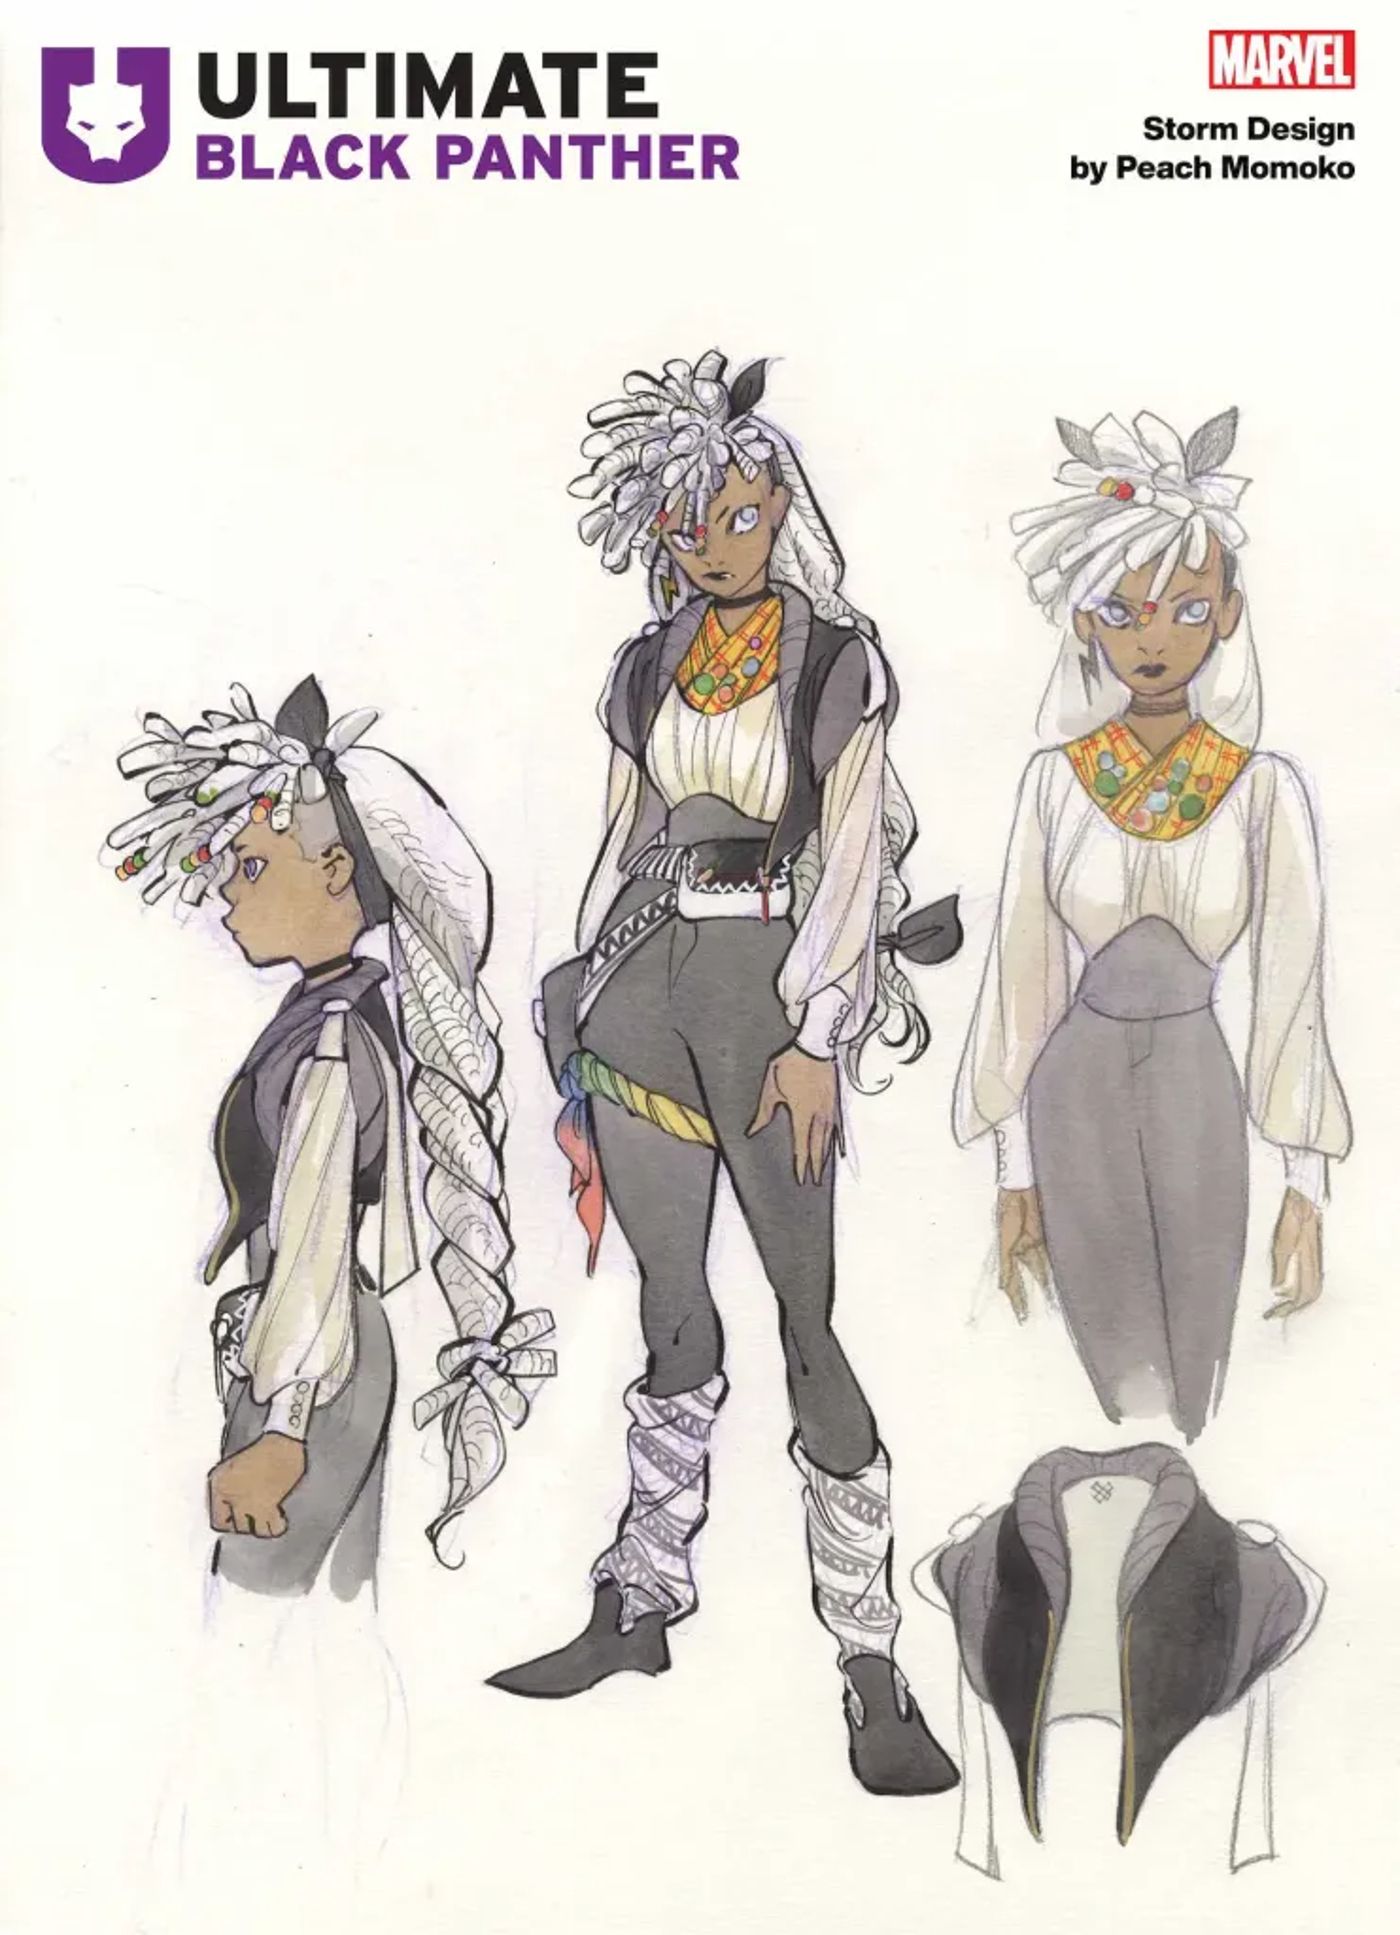 Concept art for Peach Momoko's new Ultimate version of Storm